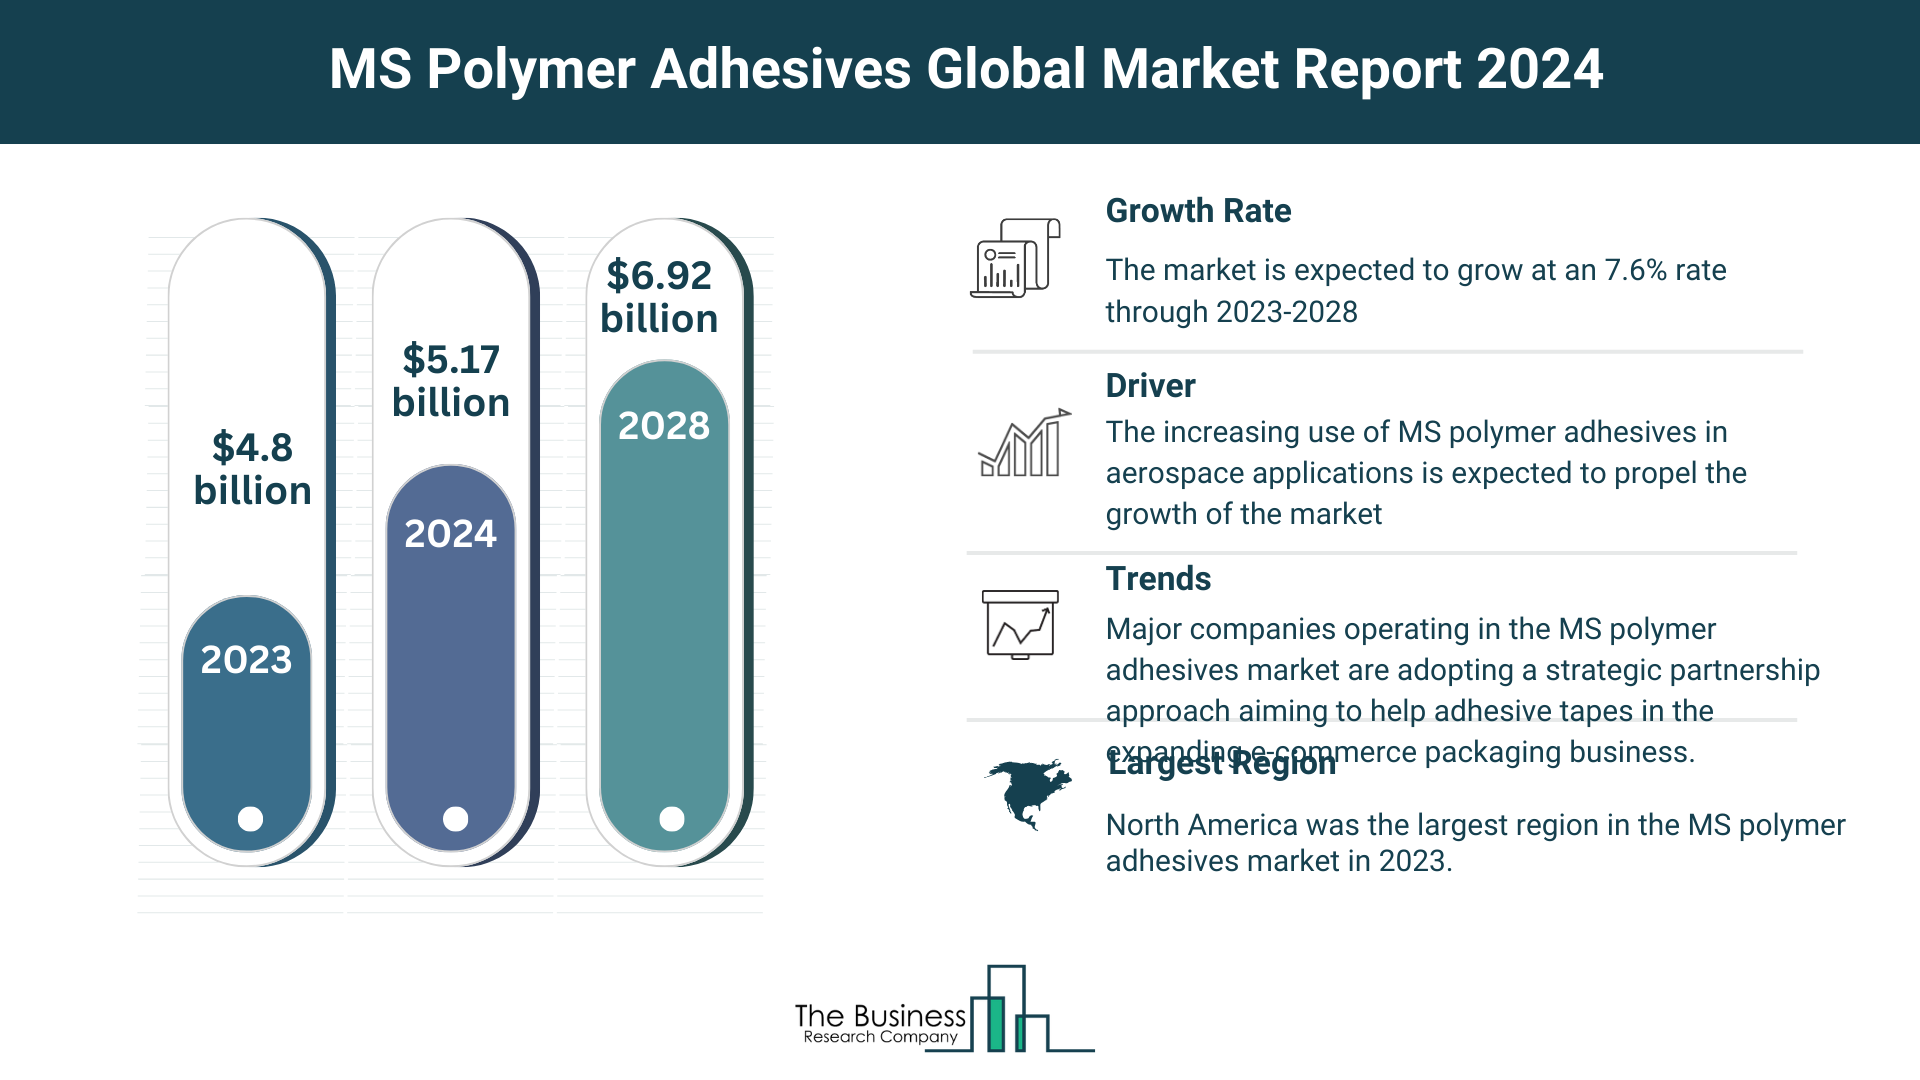 MS Polymer Adhesives Market Overview: Market Size, Major Drivers And Trends